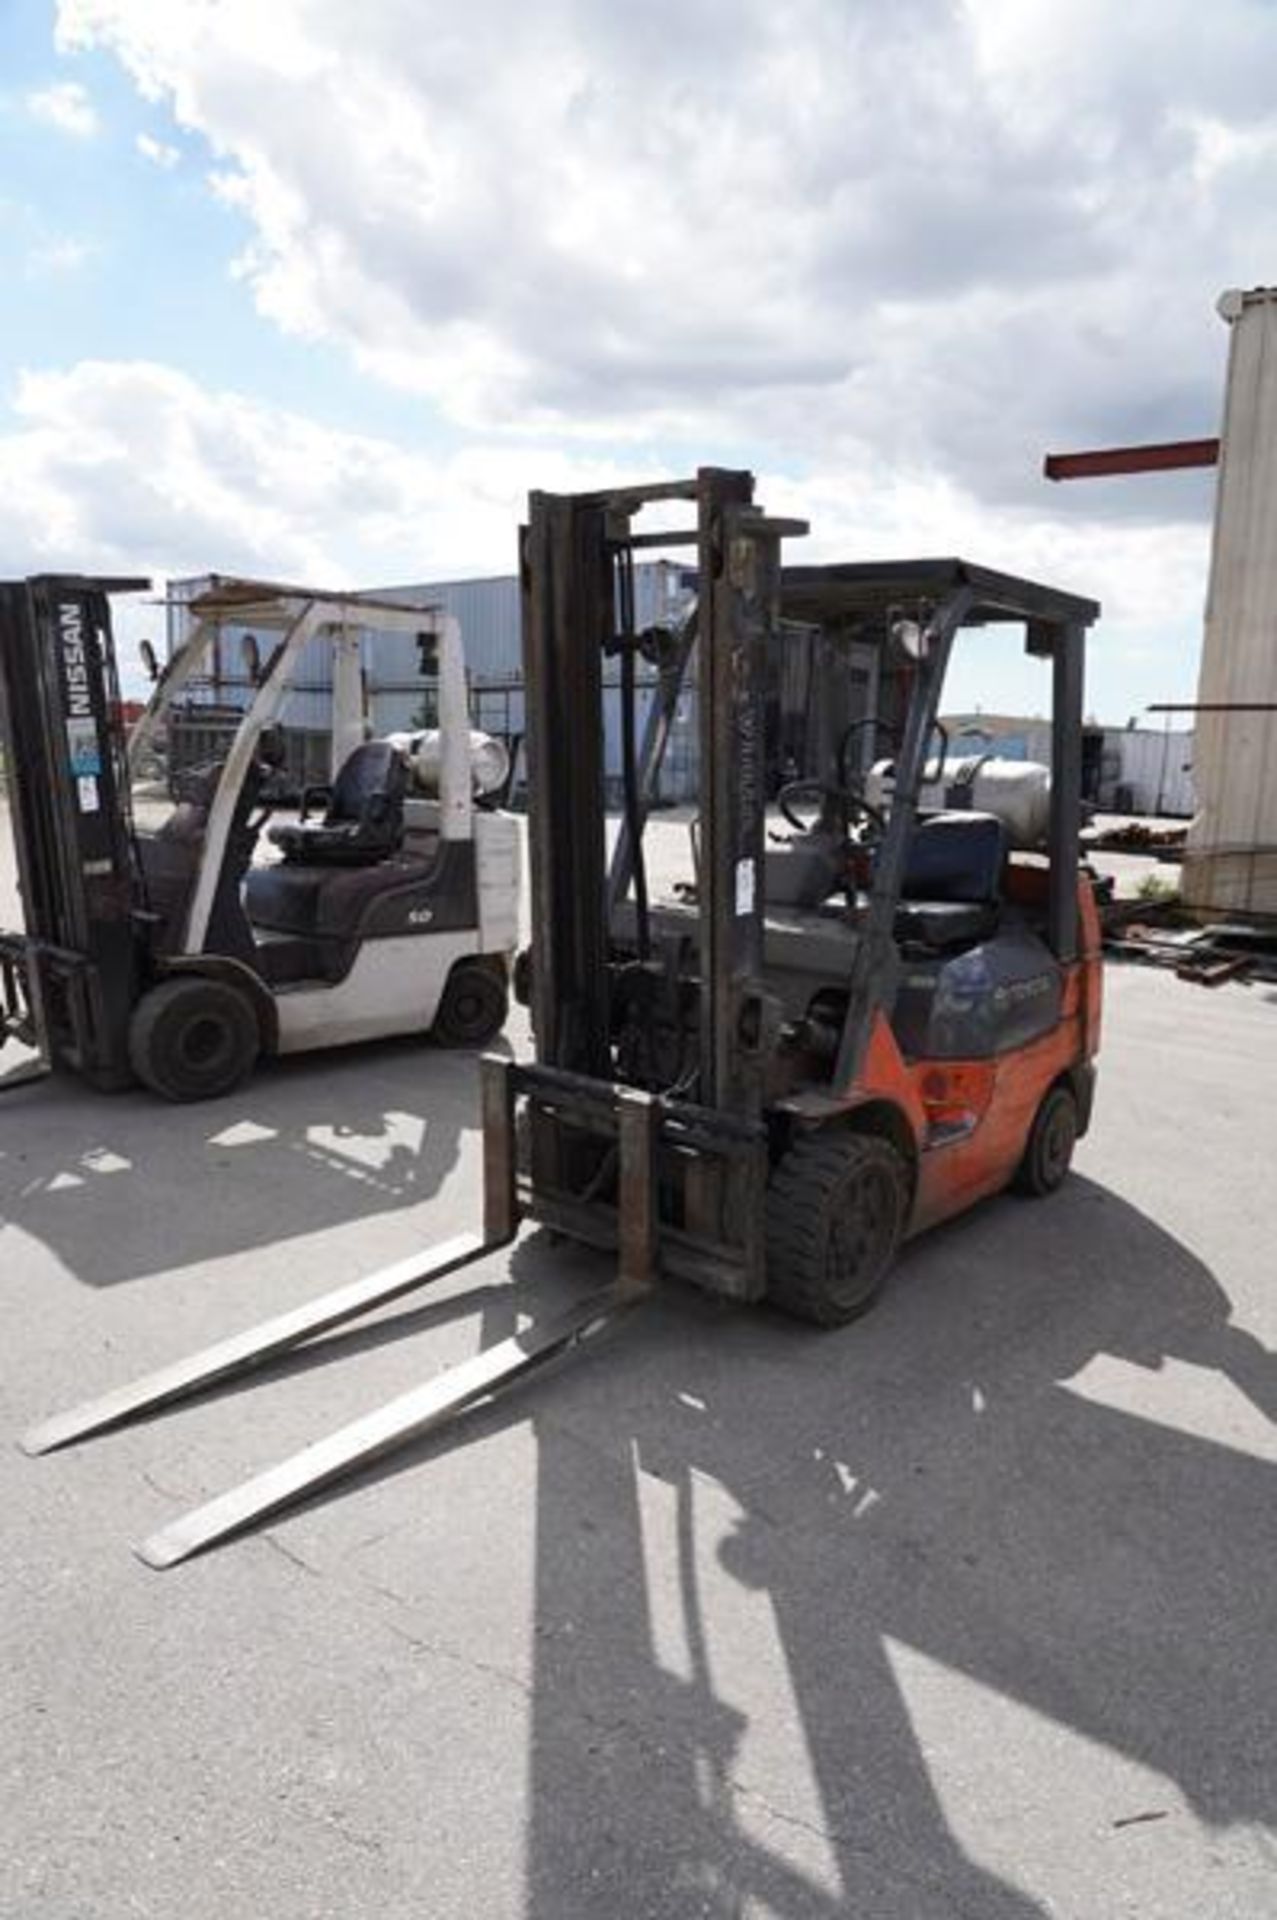 Toyota Mdl: 7FGCU25 5,000 Lbs. Propane Forklift, 5,000 Lbs Lift Capacity, Load Center 24'', Lift Spe - Image 2 of 13